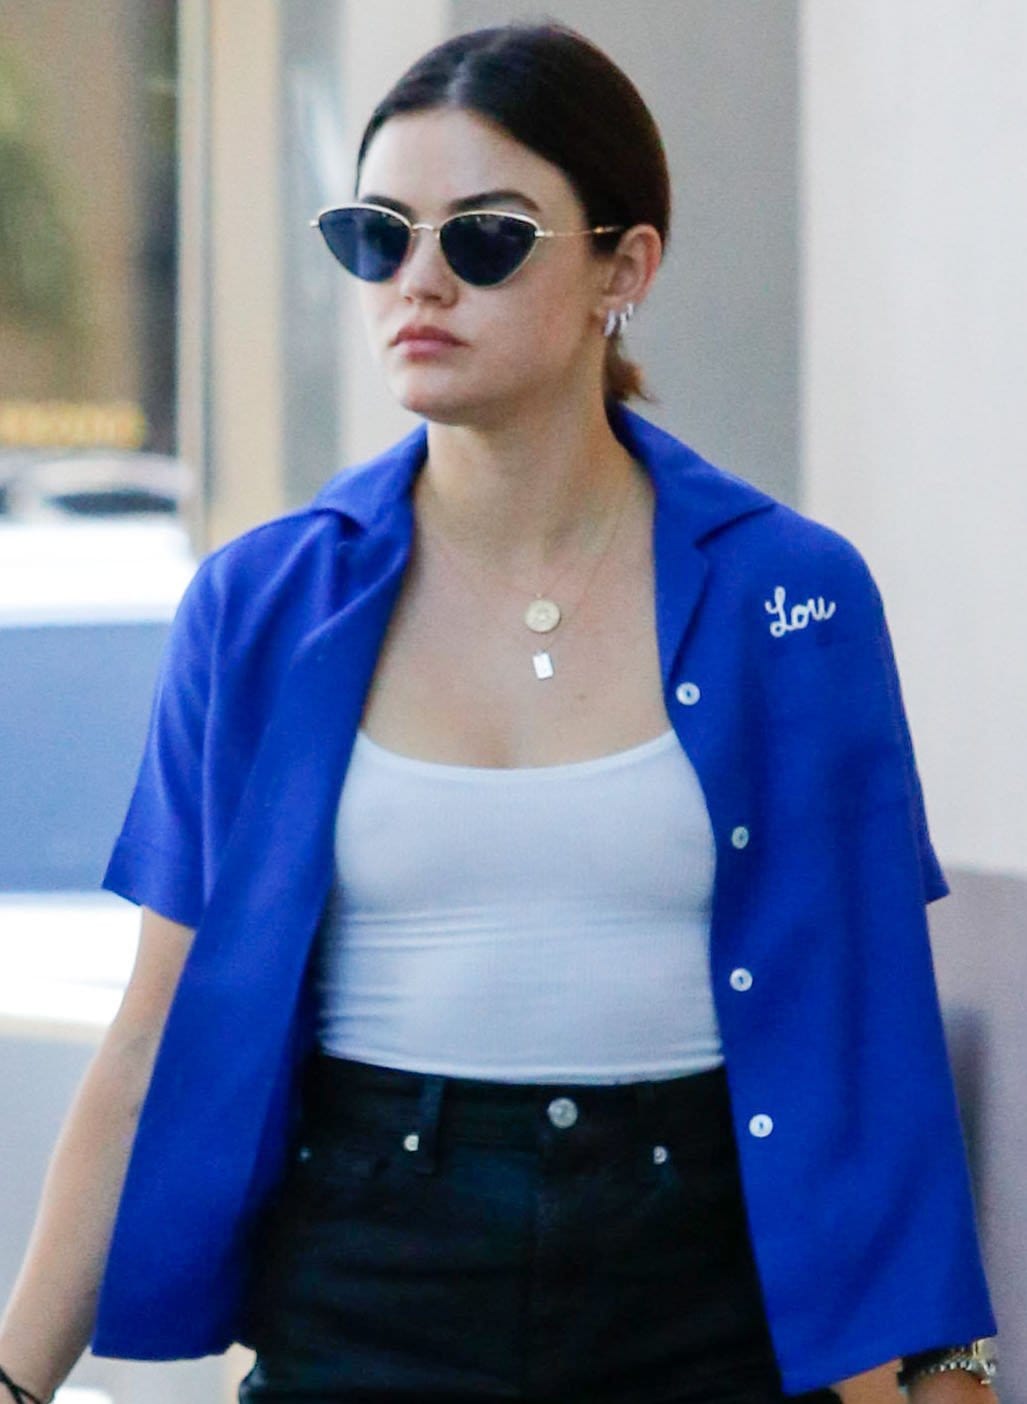 Lucy Hale pulls her hair back into a low ponytail and wears minimal makeup with Paradigm cat-eye sunglasses